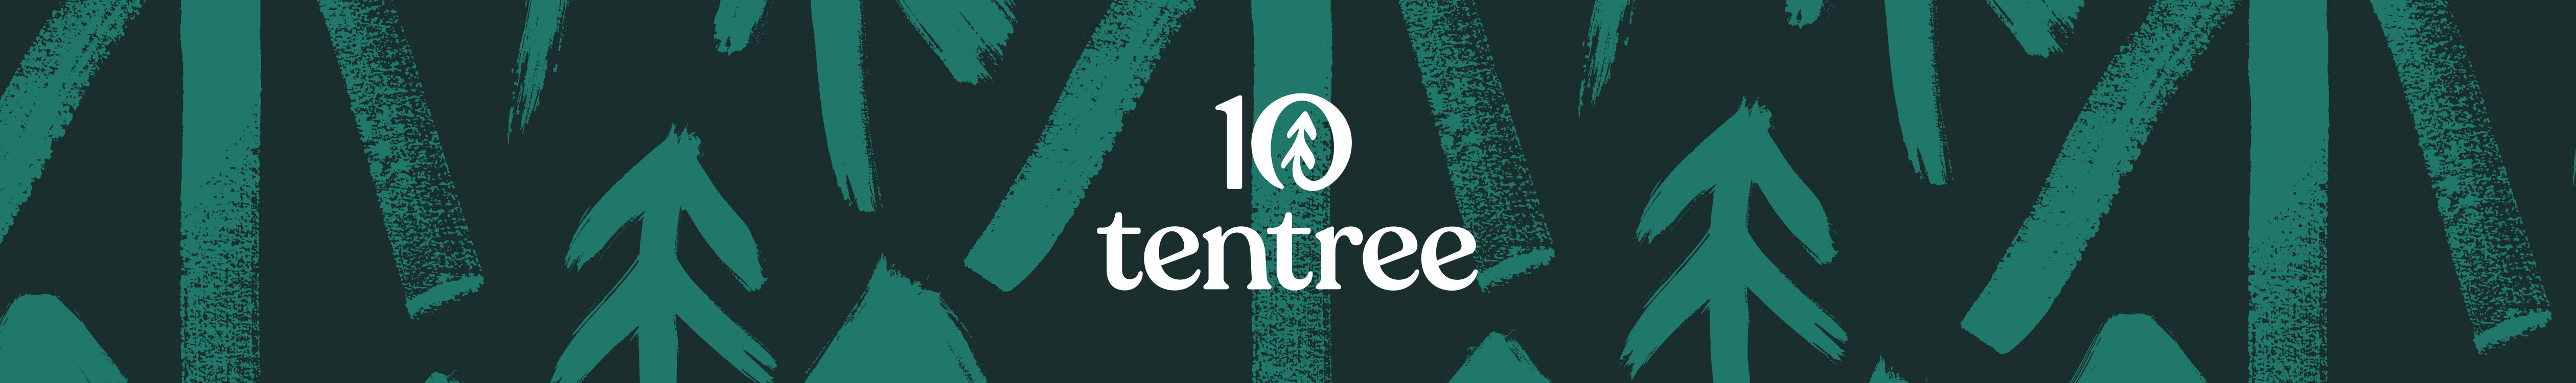 Pictures of green trees on the background with the Tentree brand logo in the middle.